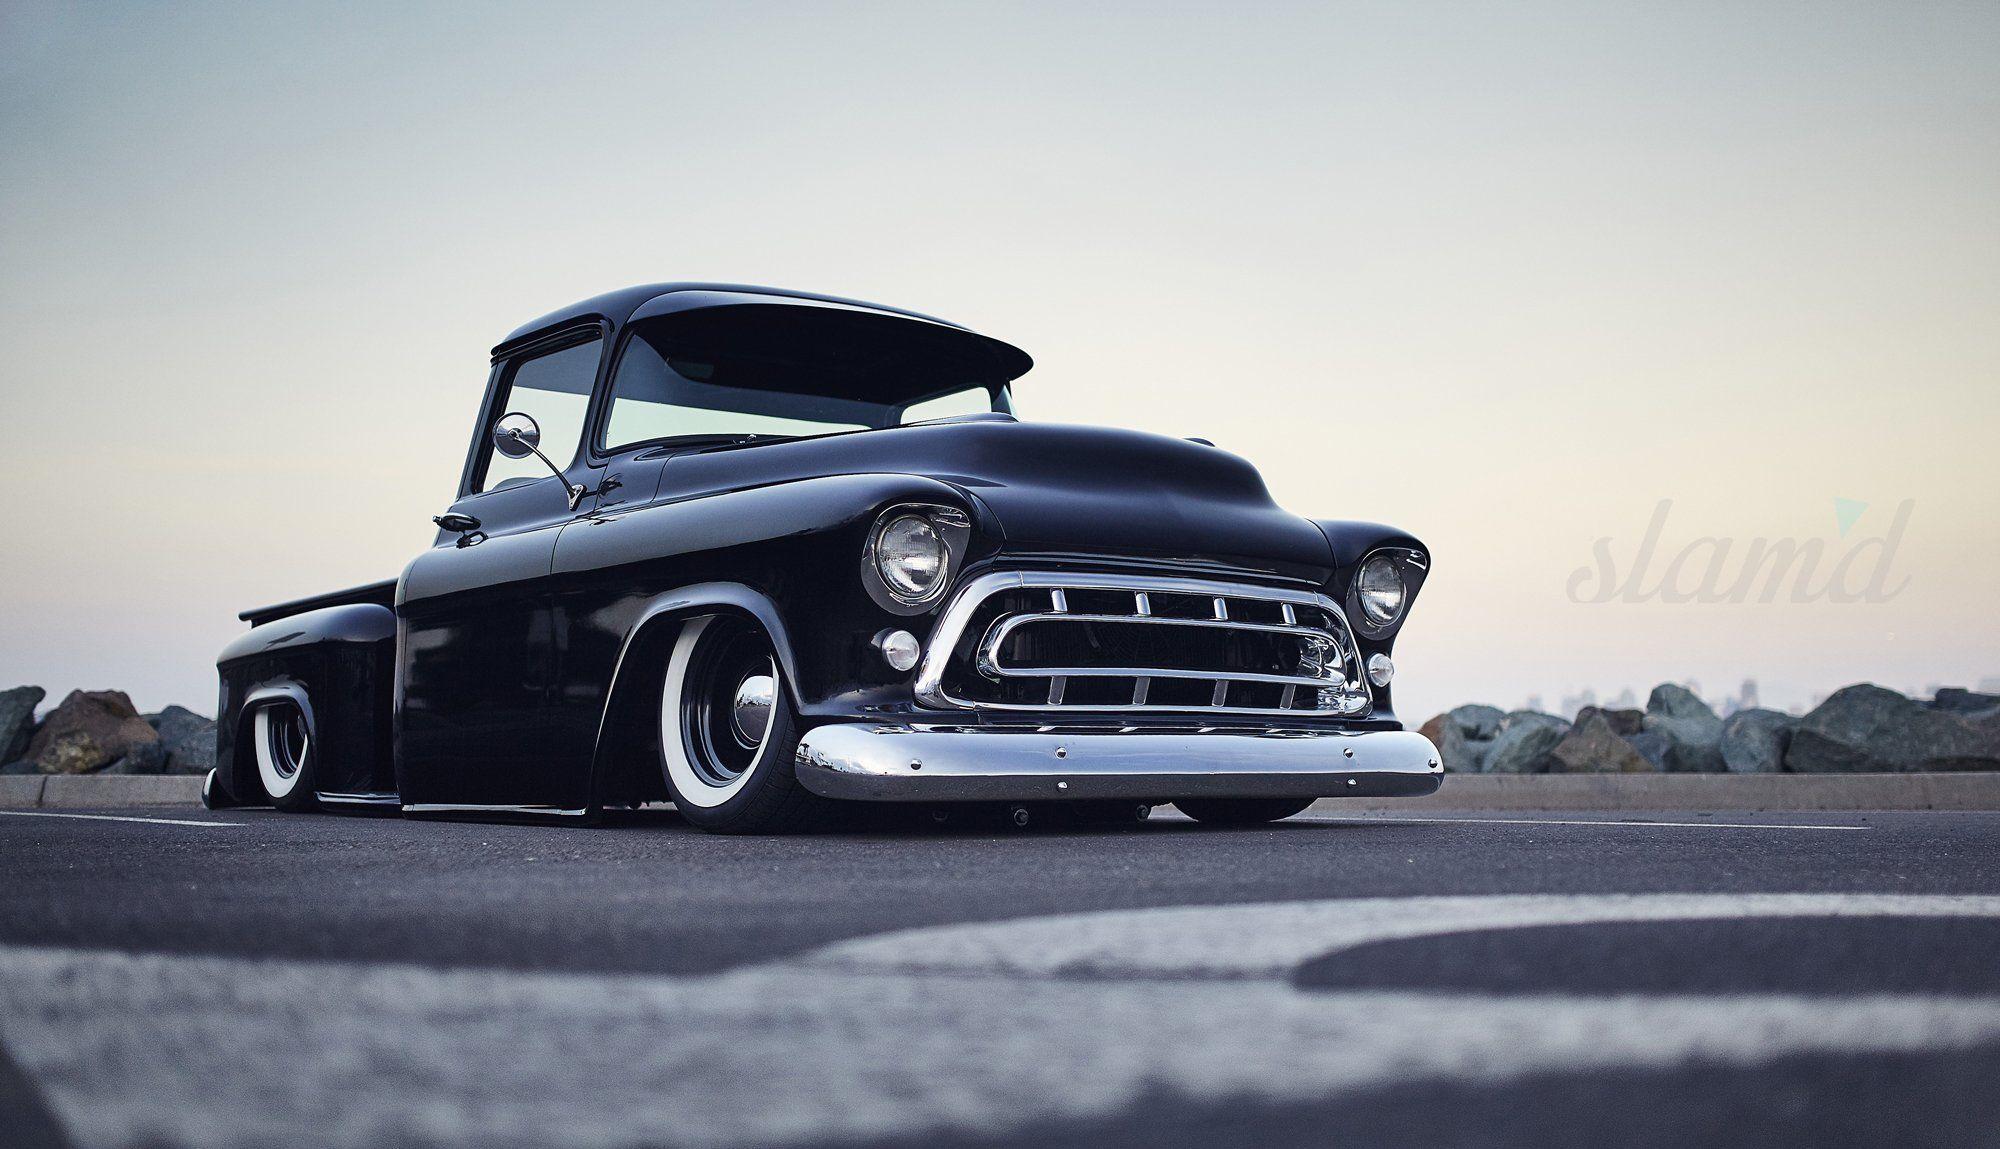 Classic Chevy Truck Wallpapers   Top Free Classic Chevy Truck